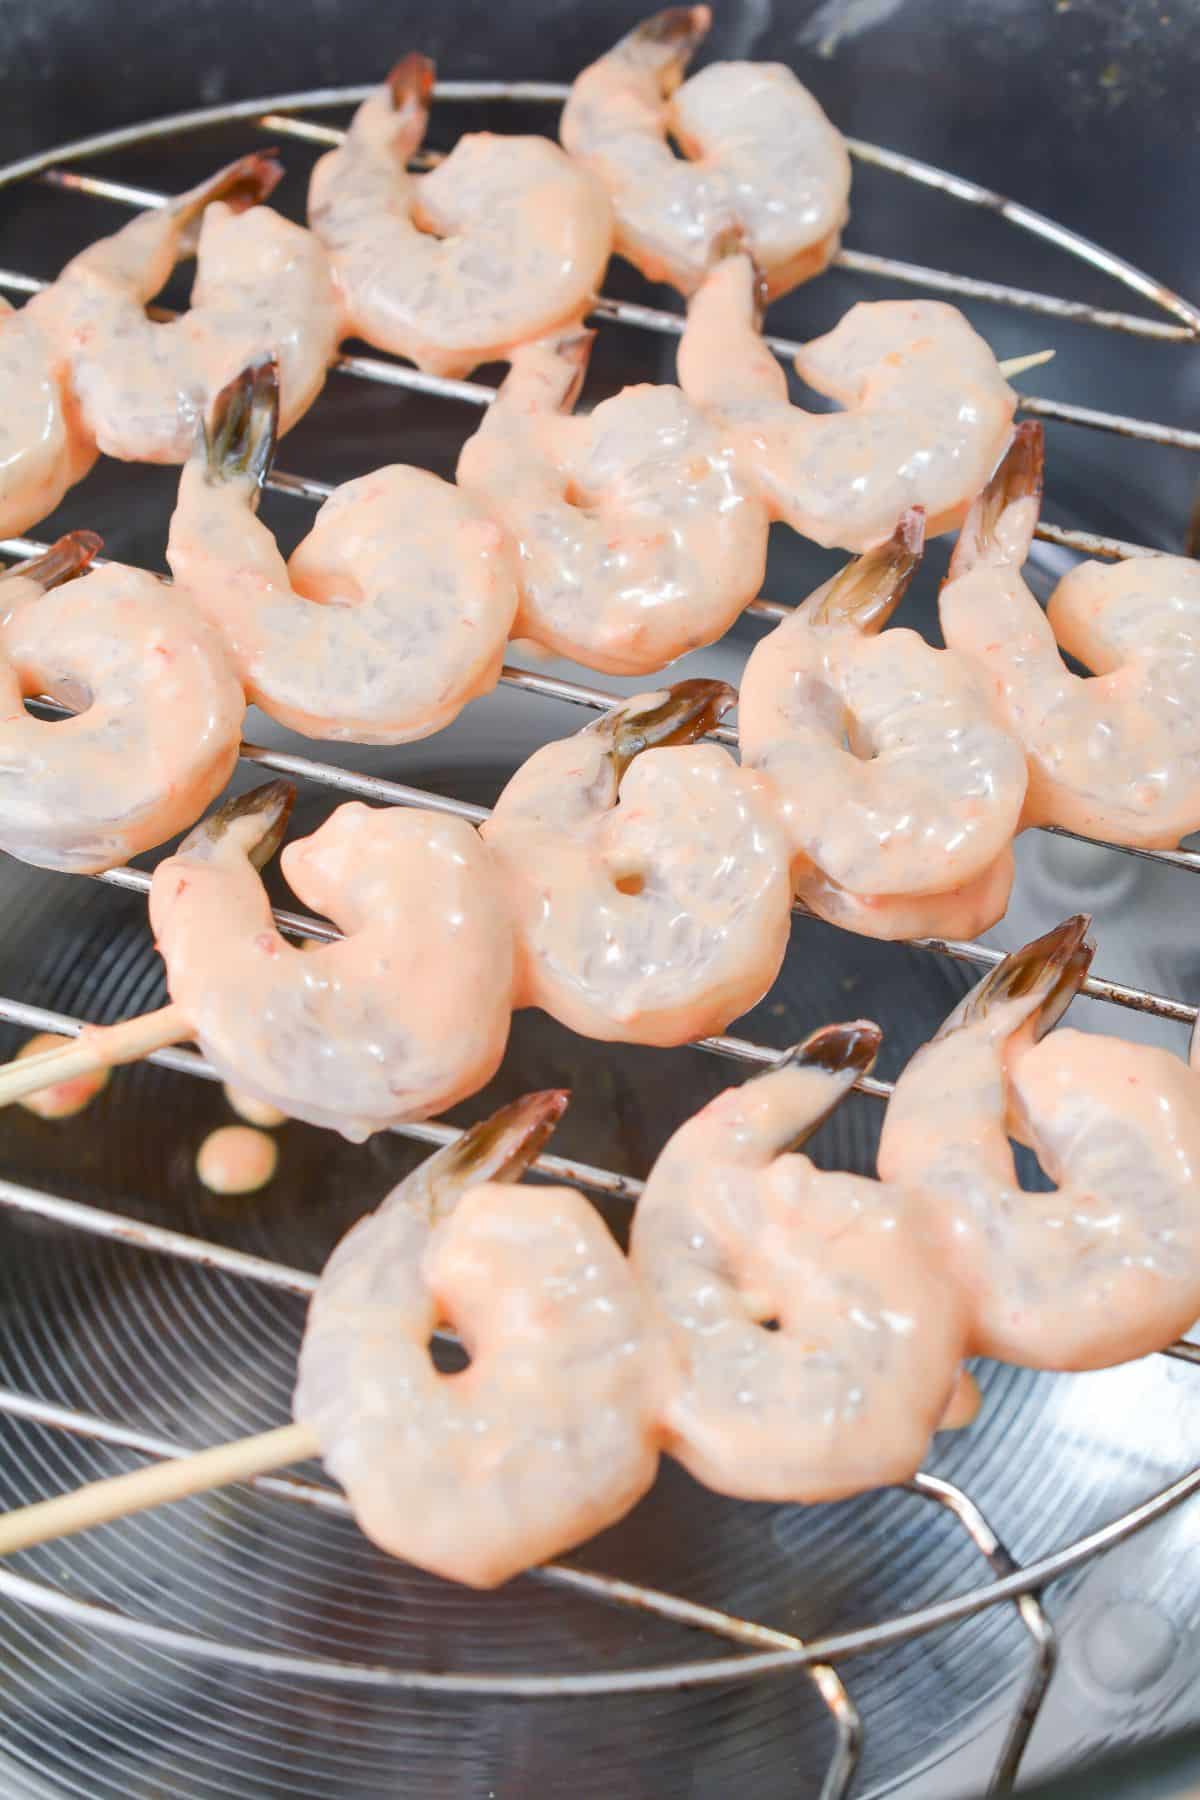 Shrimp with sauce on wooden skewers placed in an Air fryer 